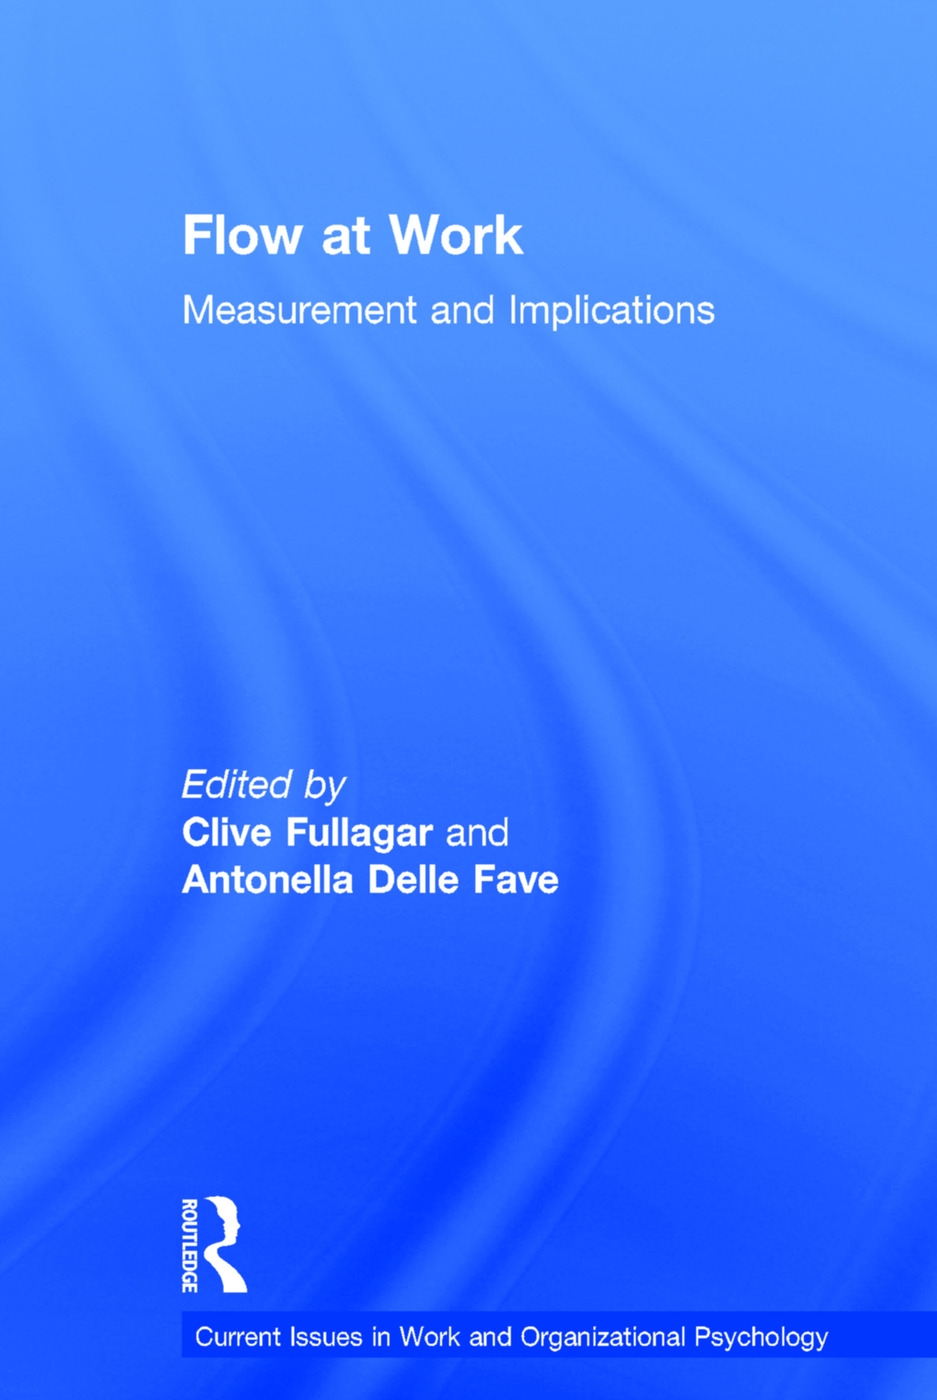 Flow at Work: Measurement and Implications